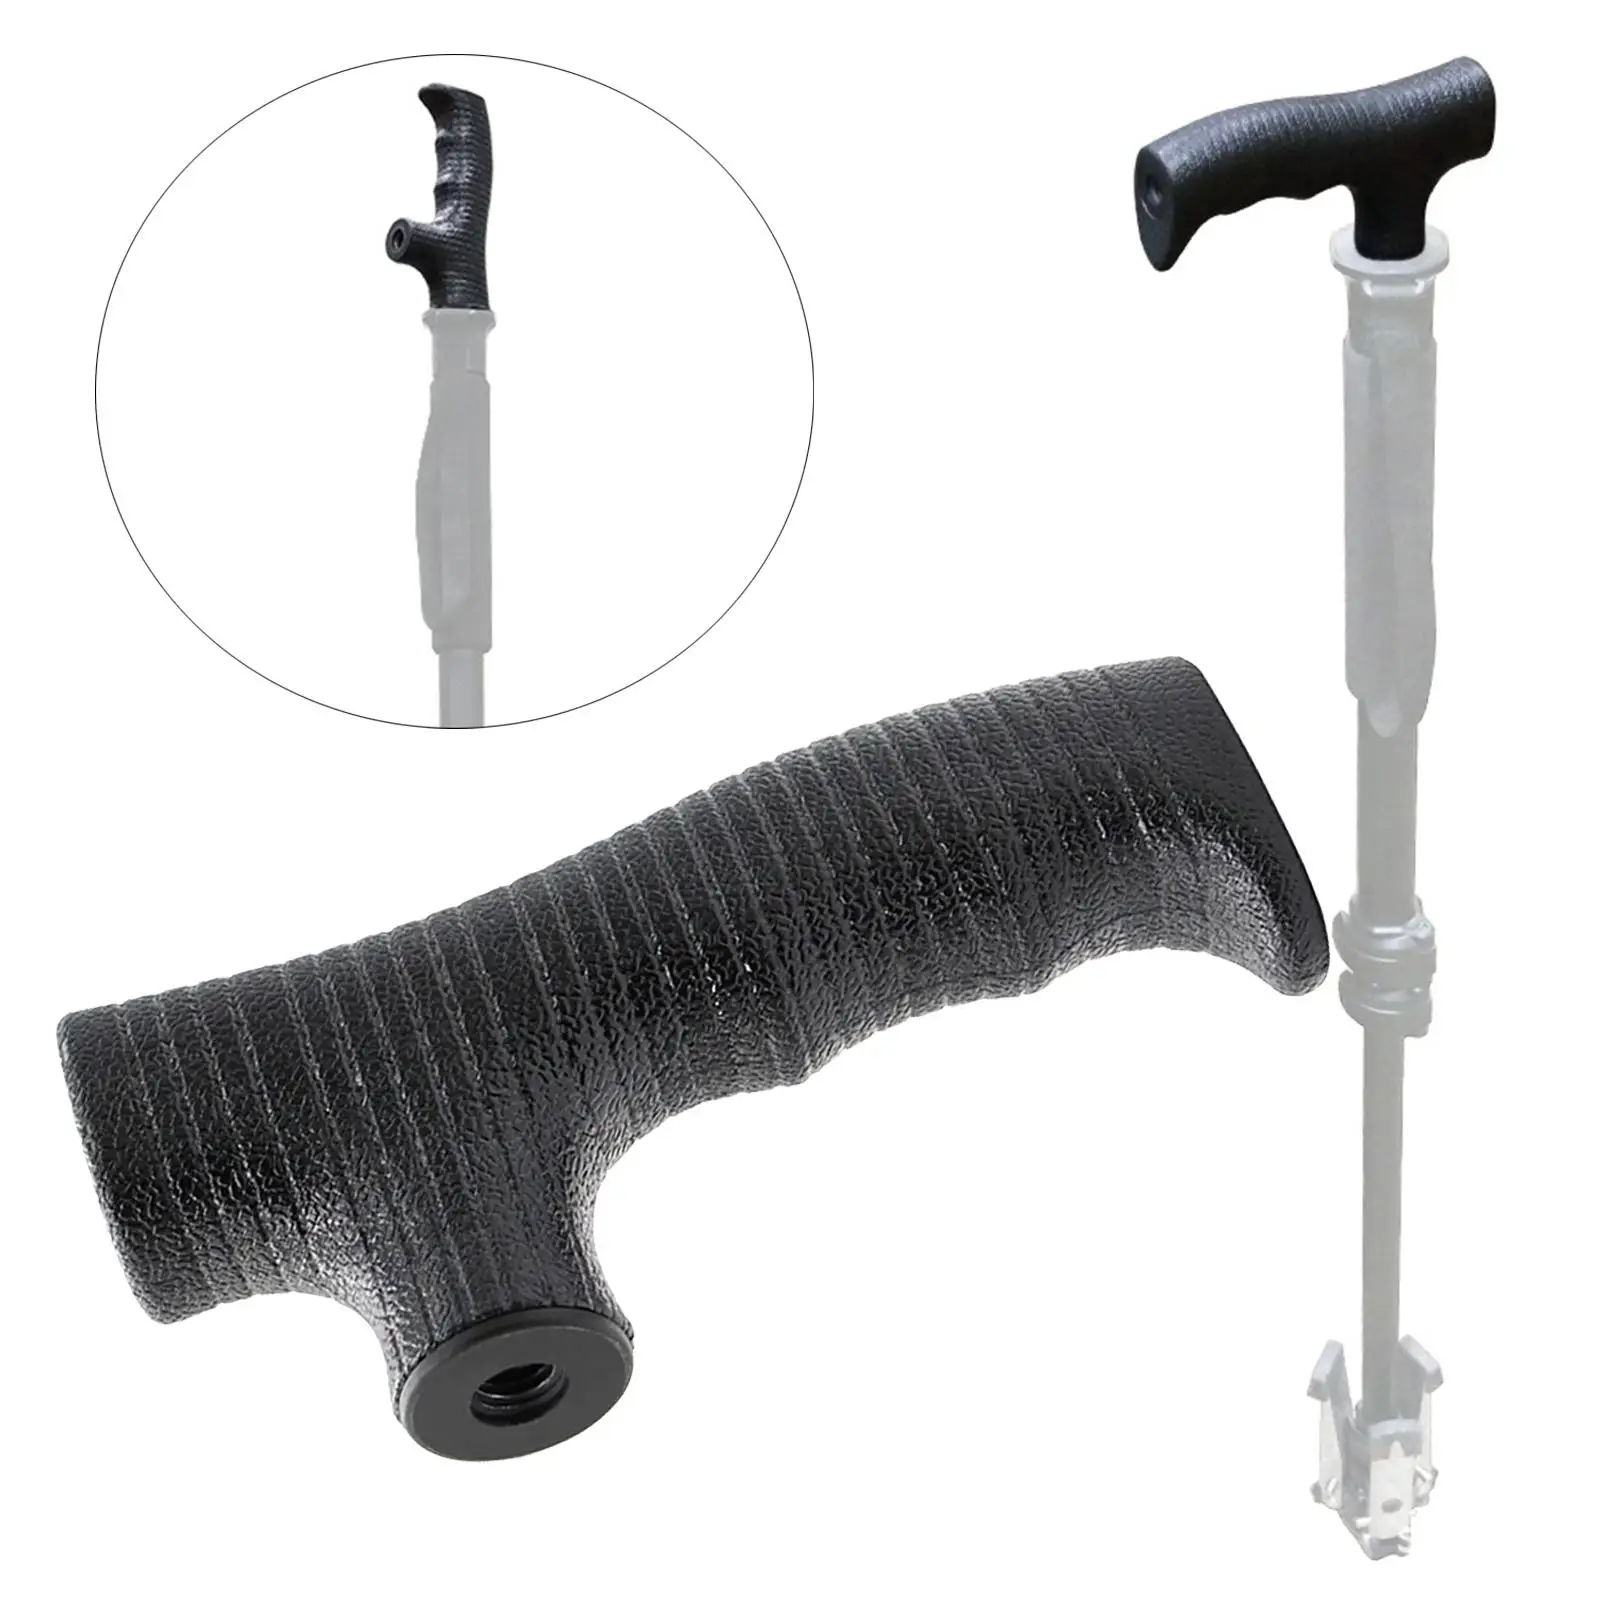 Walking Sticks Cane Hand Grip Trekking Pole Handle Spare Parts Supplies Repair Parts Accs Replacement for Rock Climbing Crutch